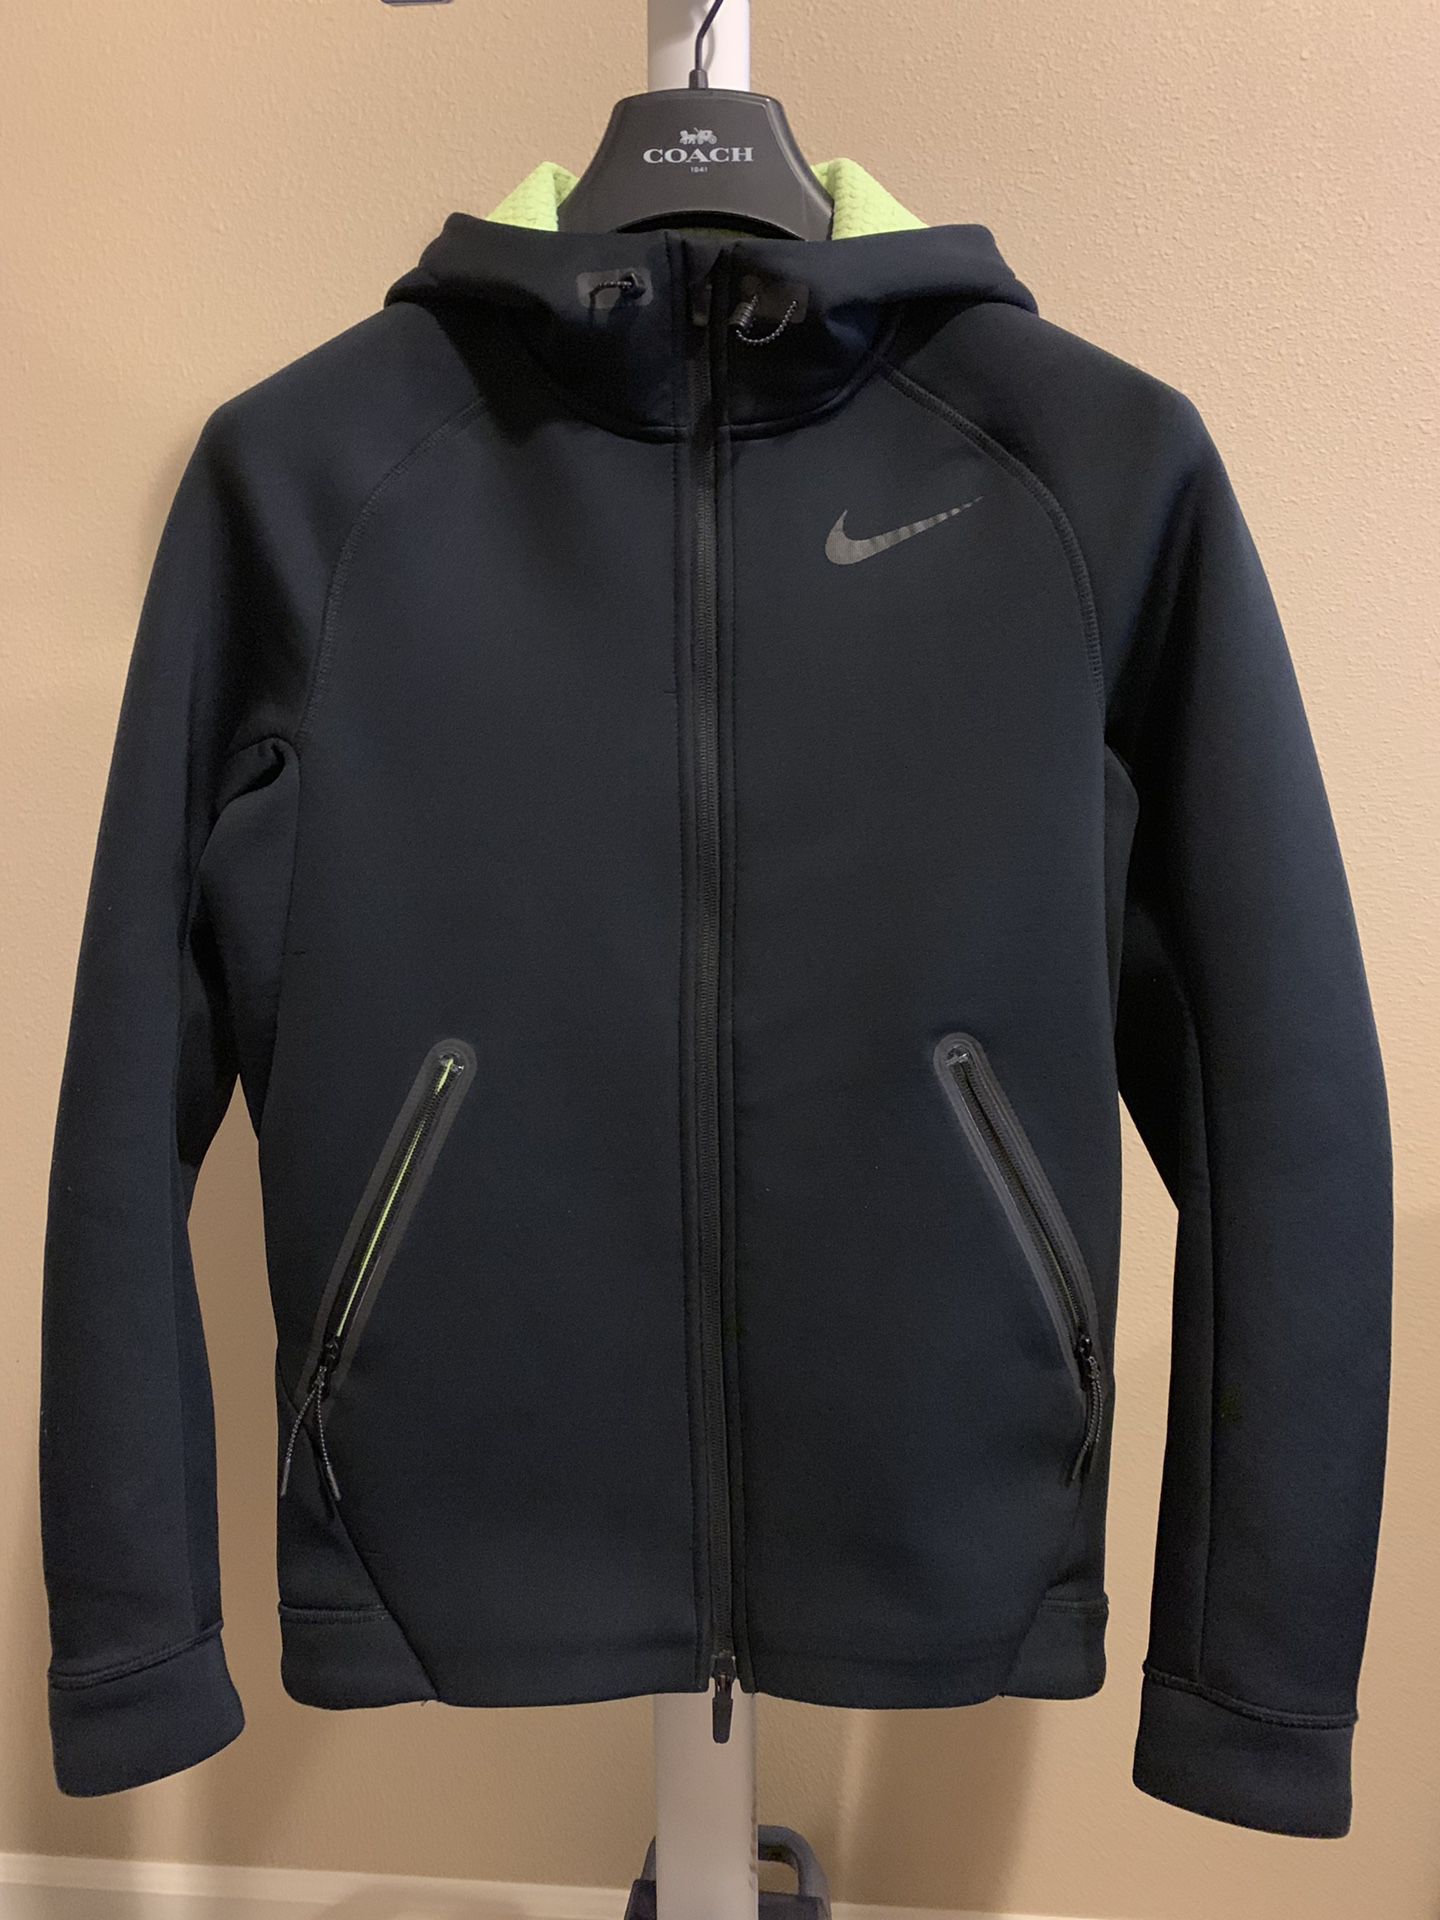 Black Nike Therma Sphere Max Jacket Small for Sale in Clackamas, - OfferUp